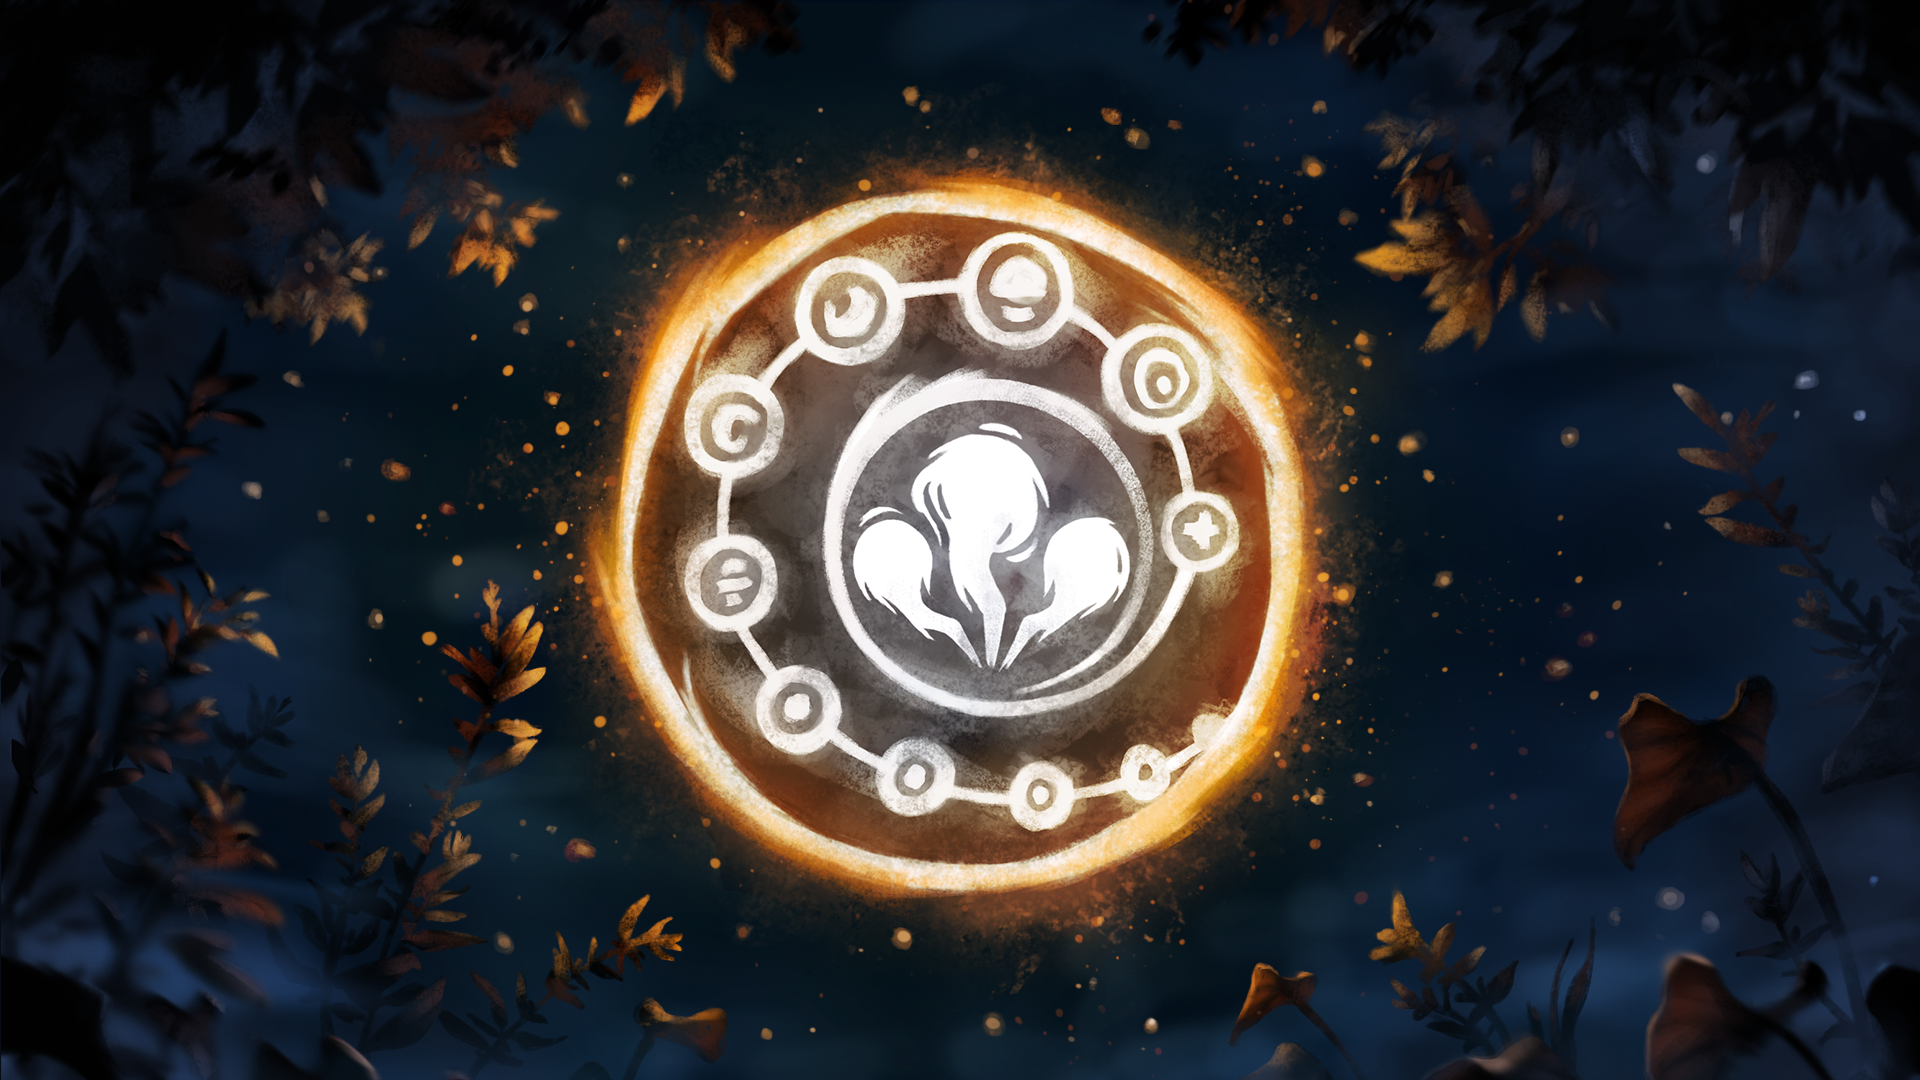 Icon for Soul Master